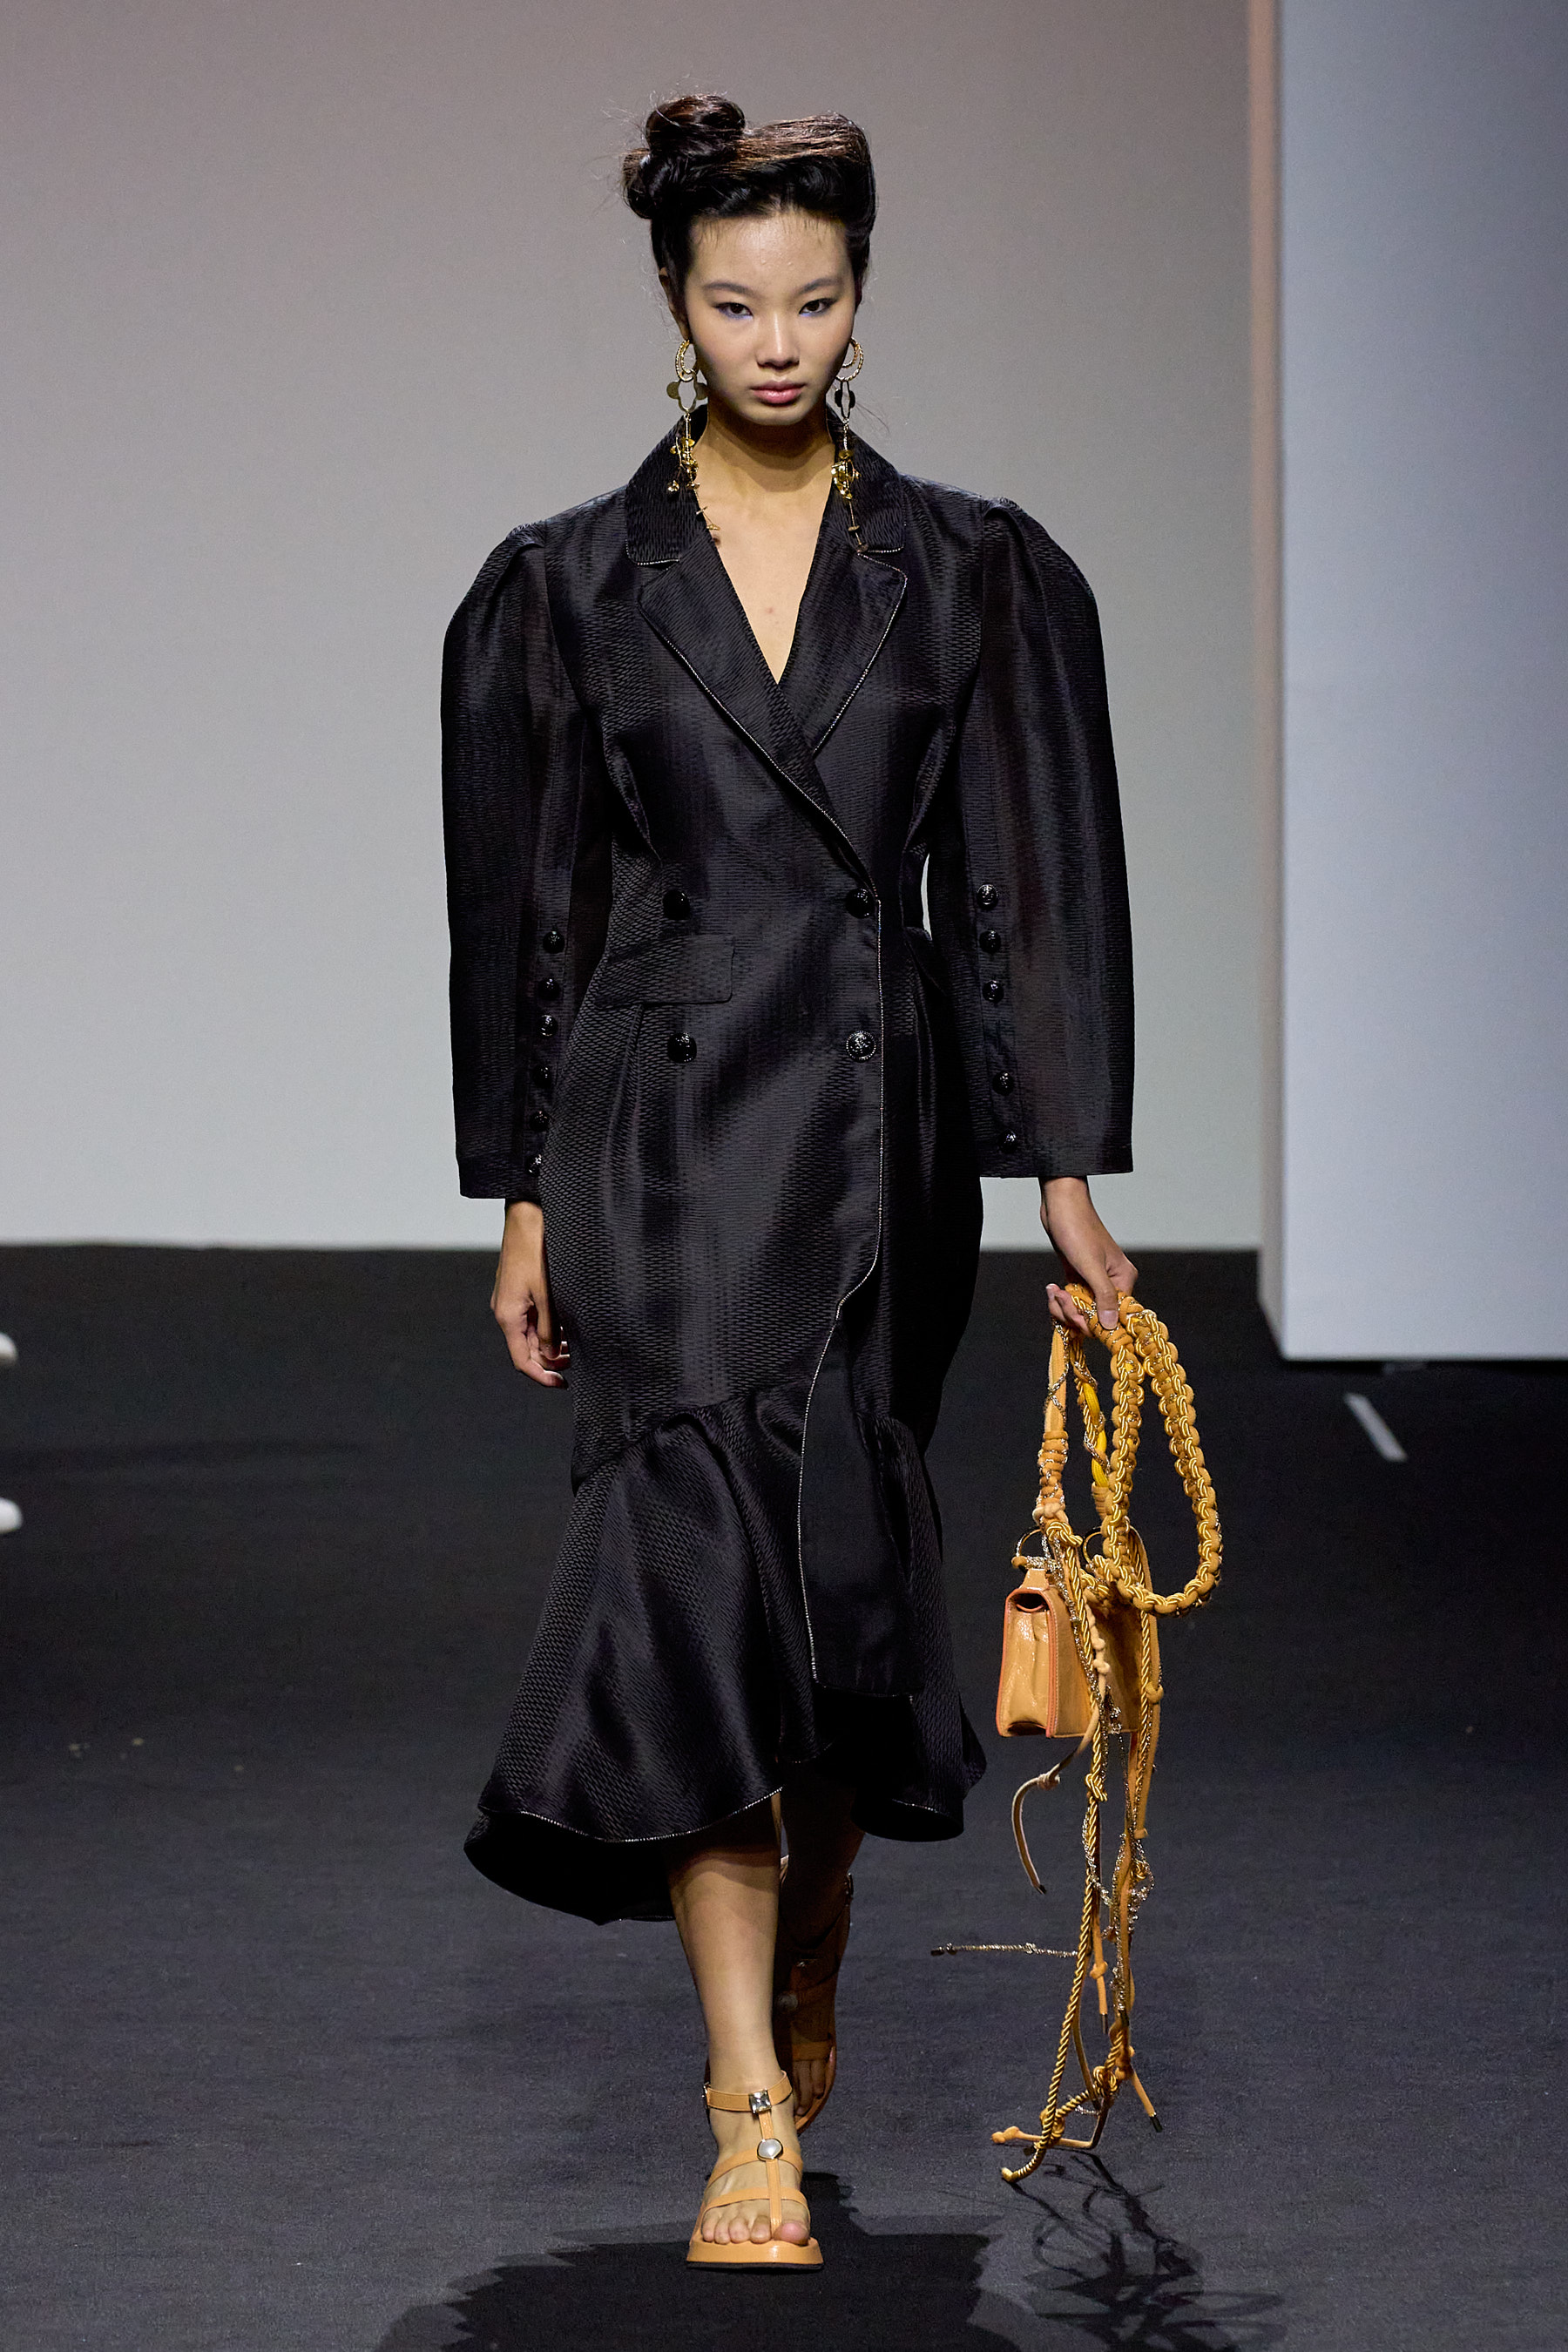 Cahiers Spring 2023 Fashion Show | The Impression